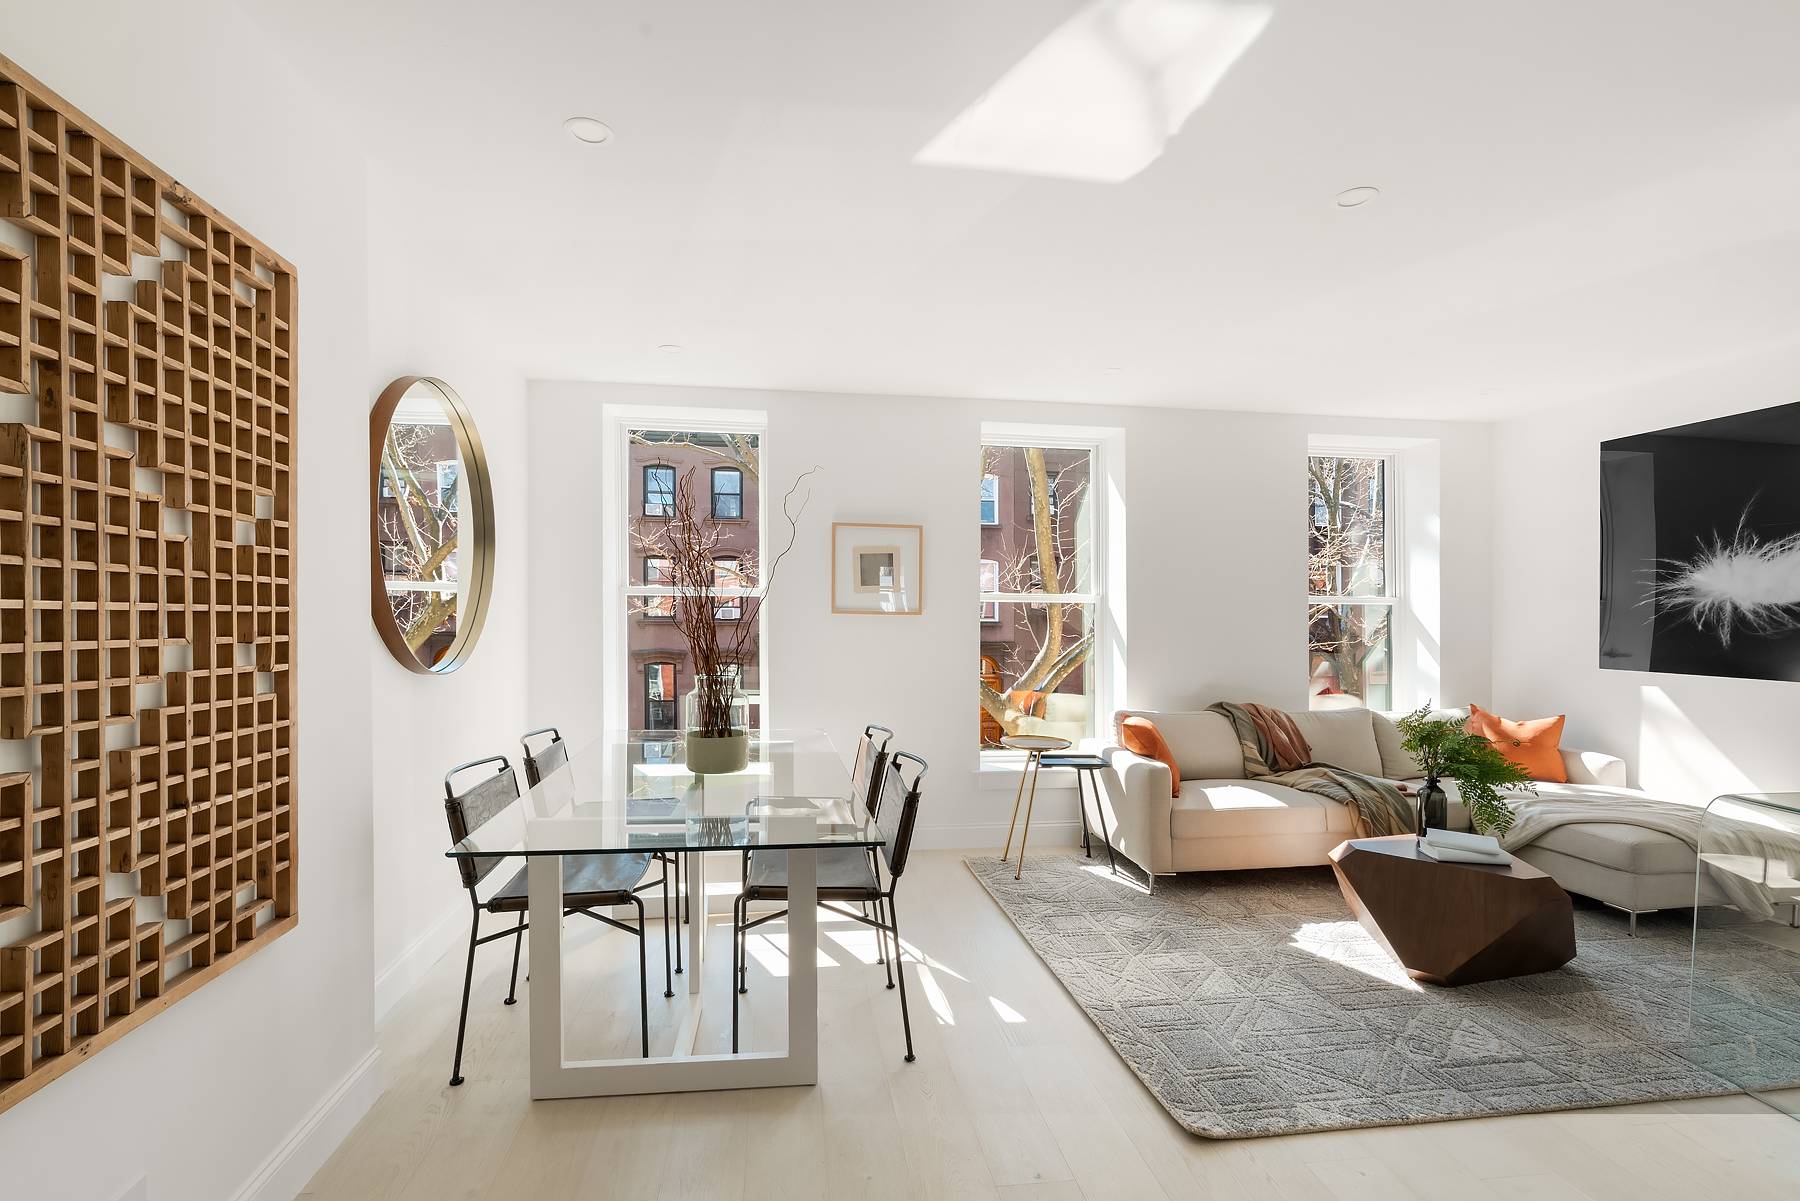 Introducing 377 Degraw St, a brand new three unit boutique condominium conversion situated perfectly at the crossroads of Carroll Gardens and Boerum Hill.